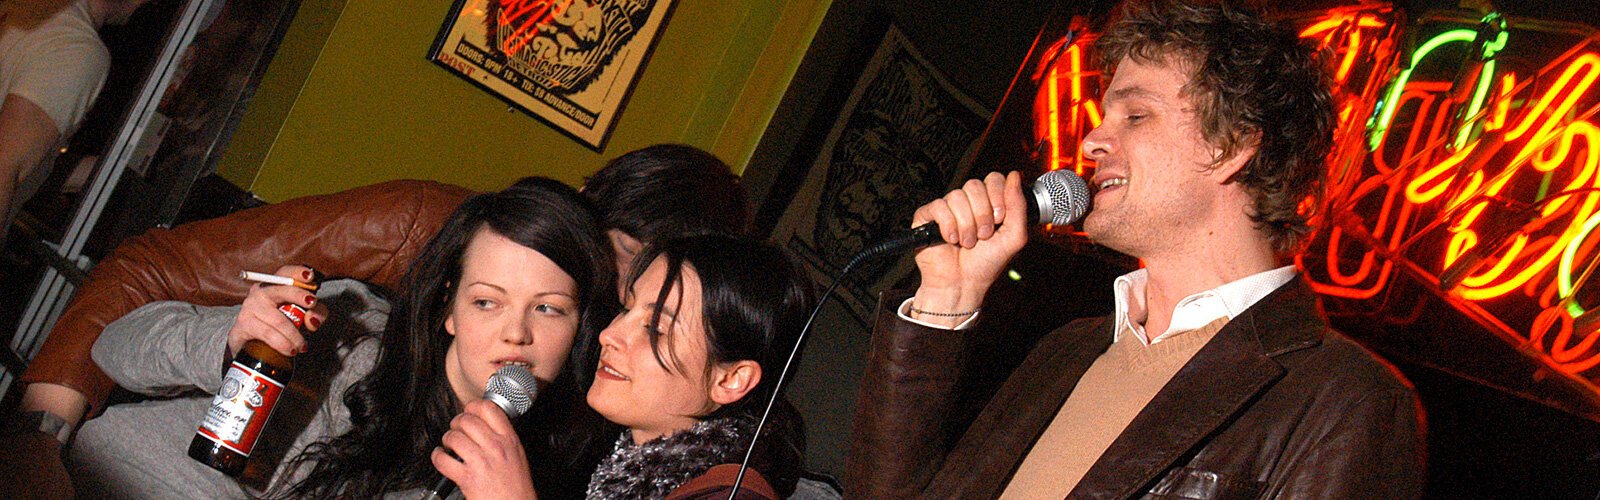 Meg White and Brendan Benson sing karaoke after Brendan's record release show at the Magic Stick. March 21, 2005.